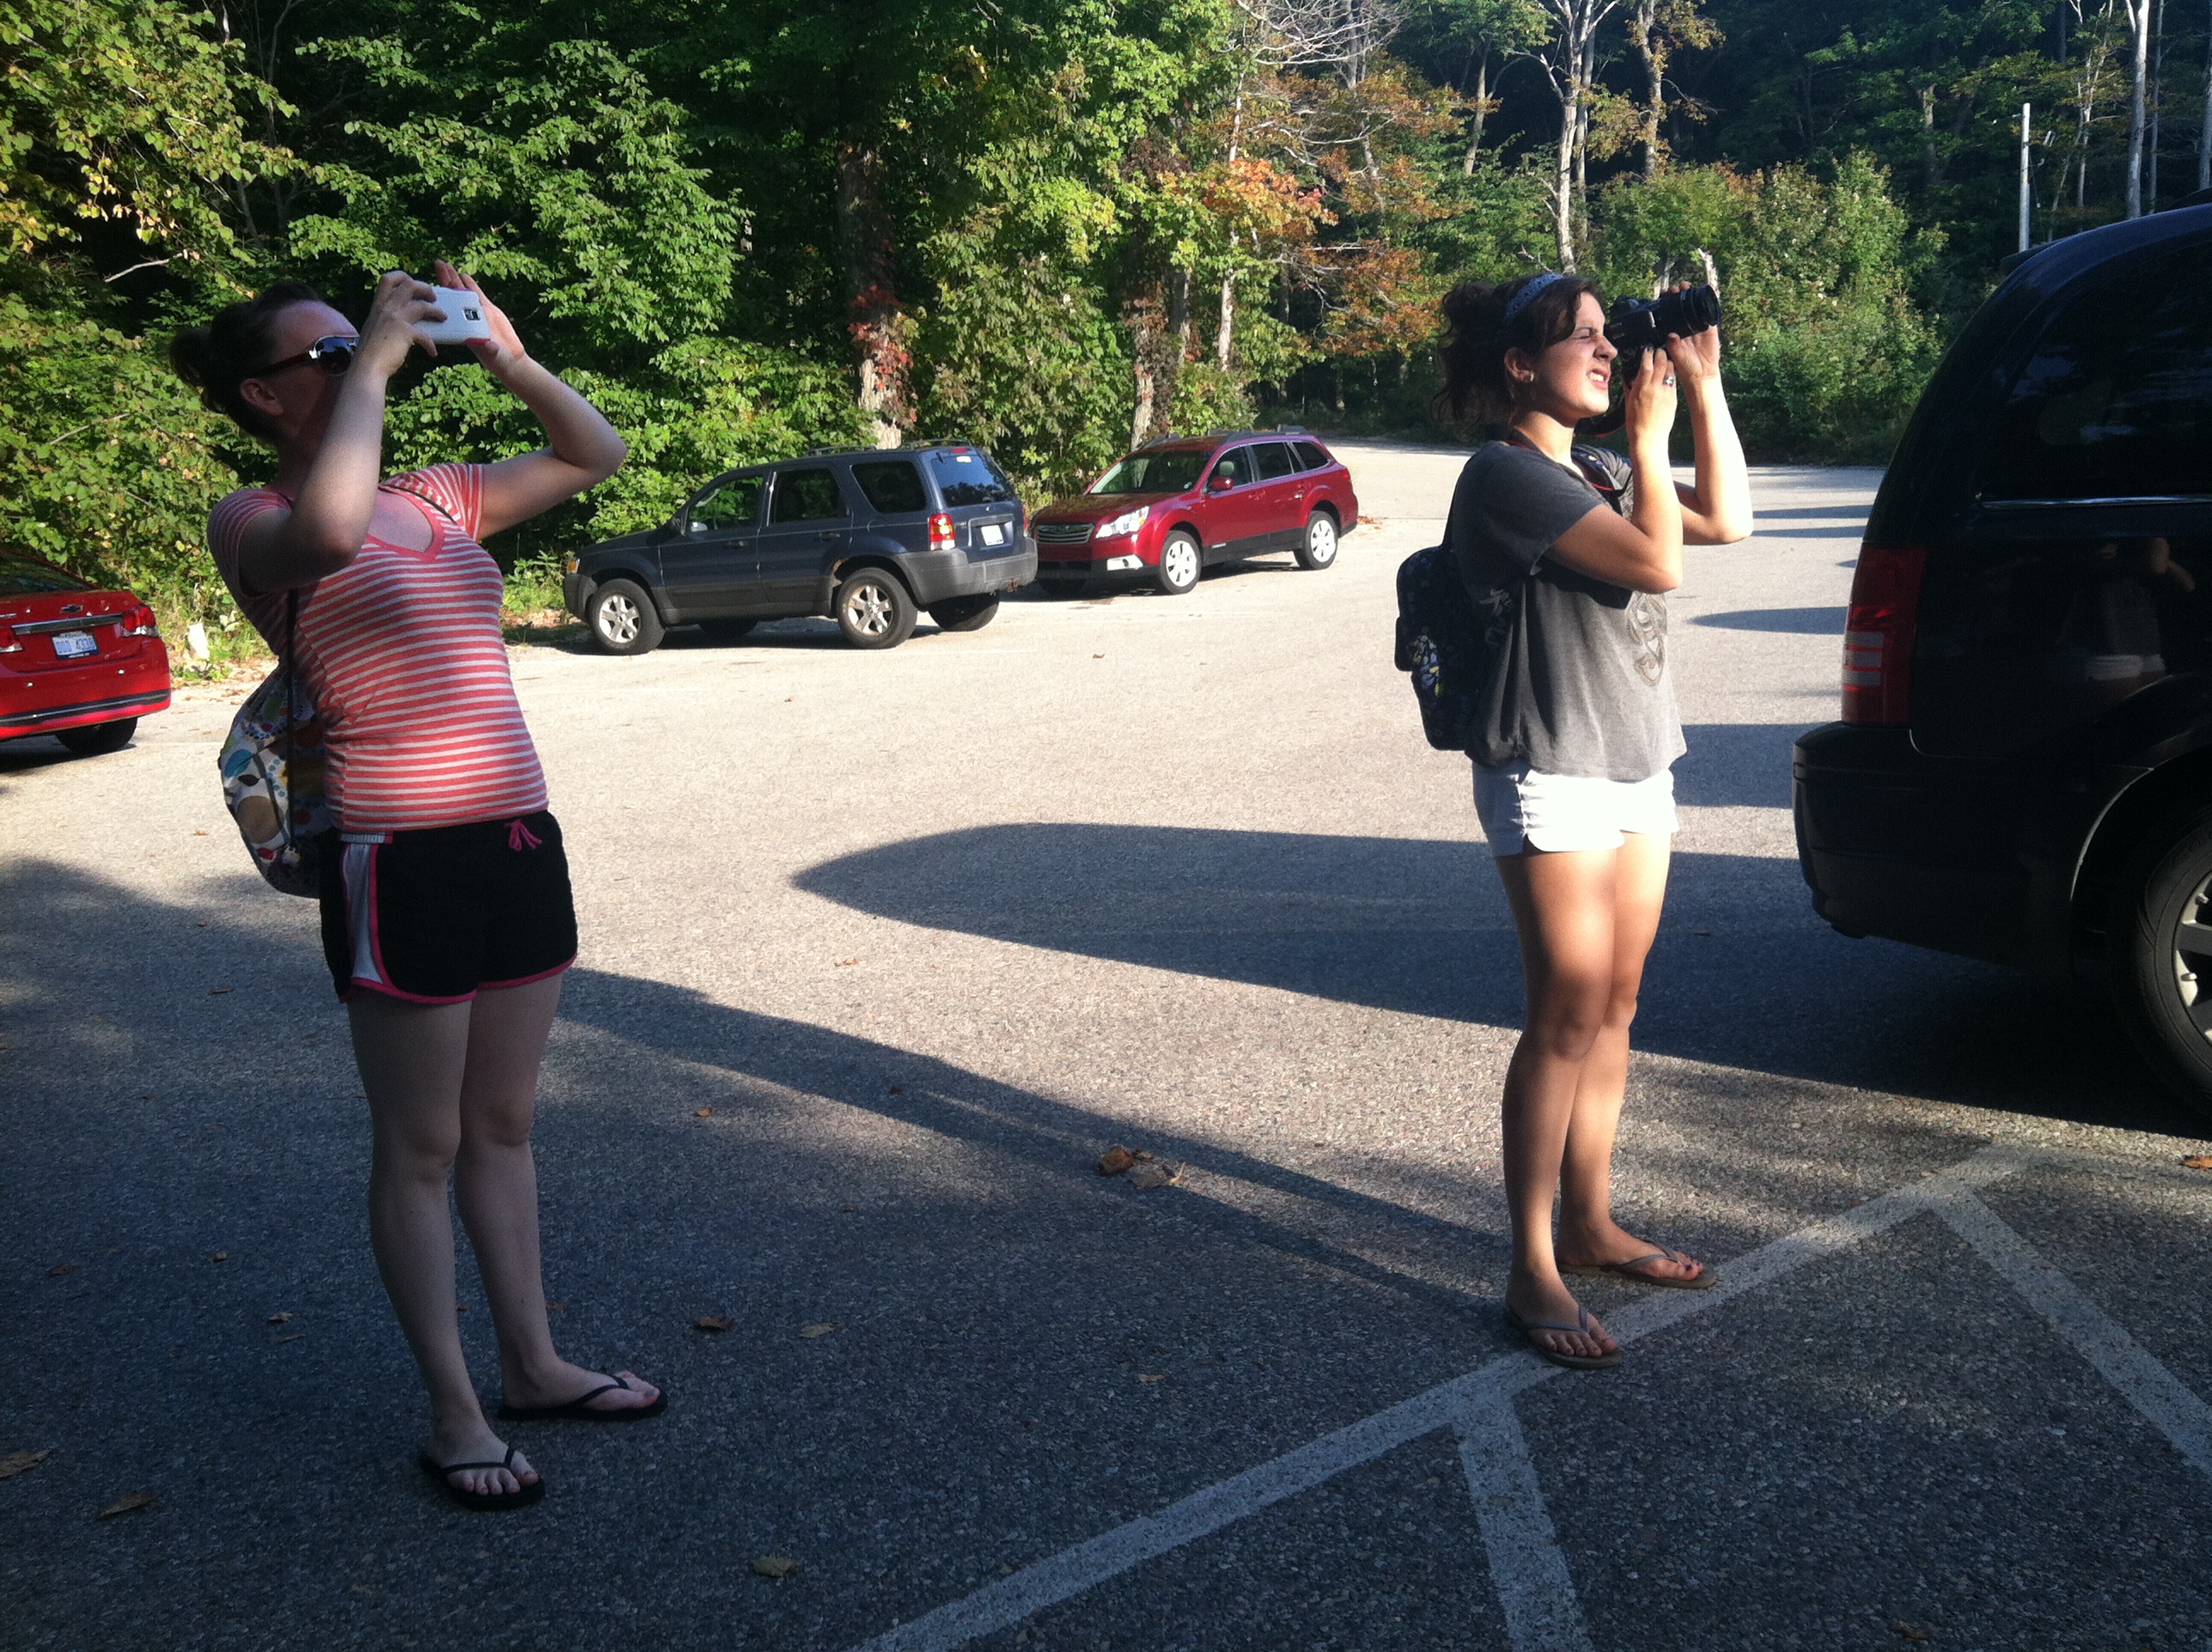 My friends taking in (and snapping pictures of) the initial view from the parking lot